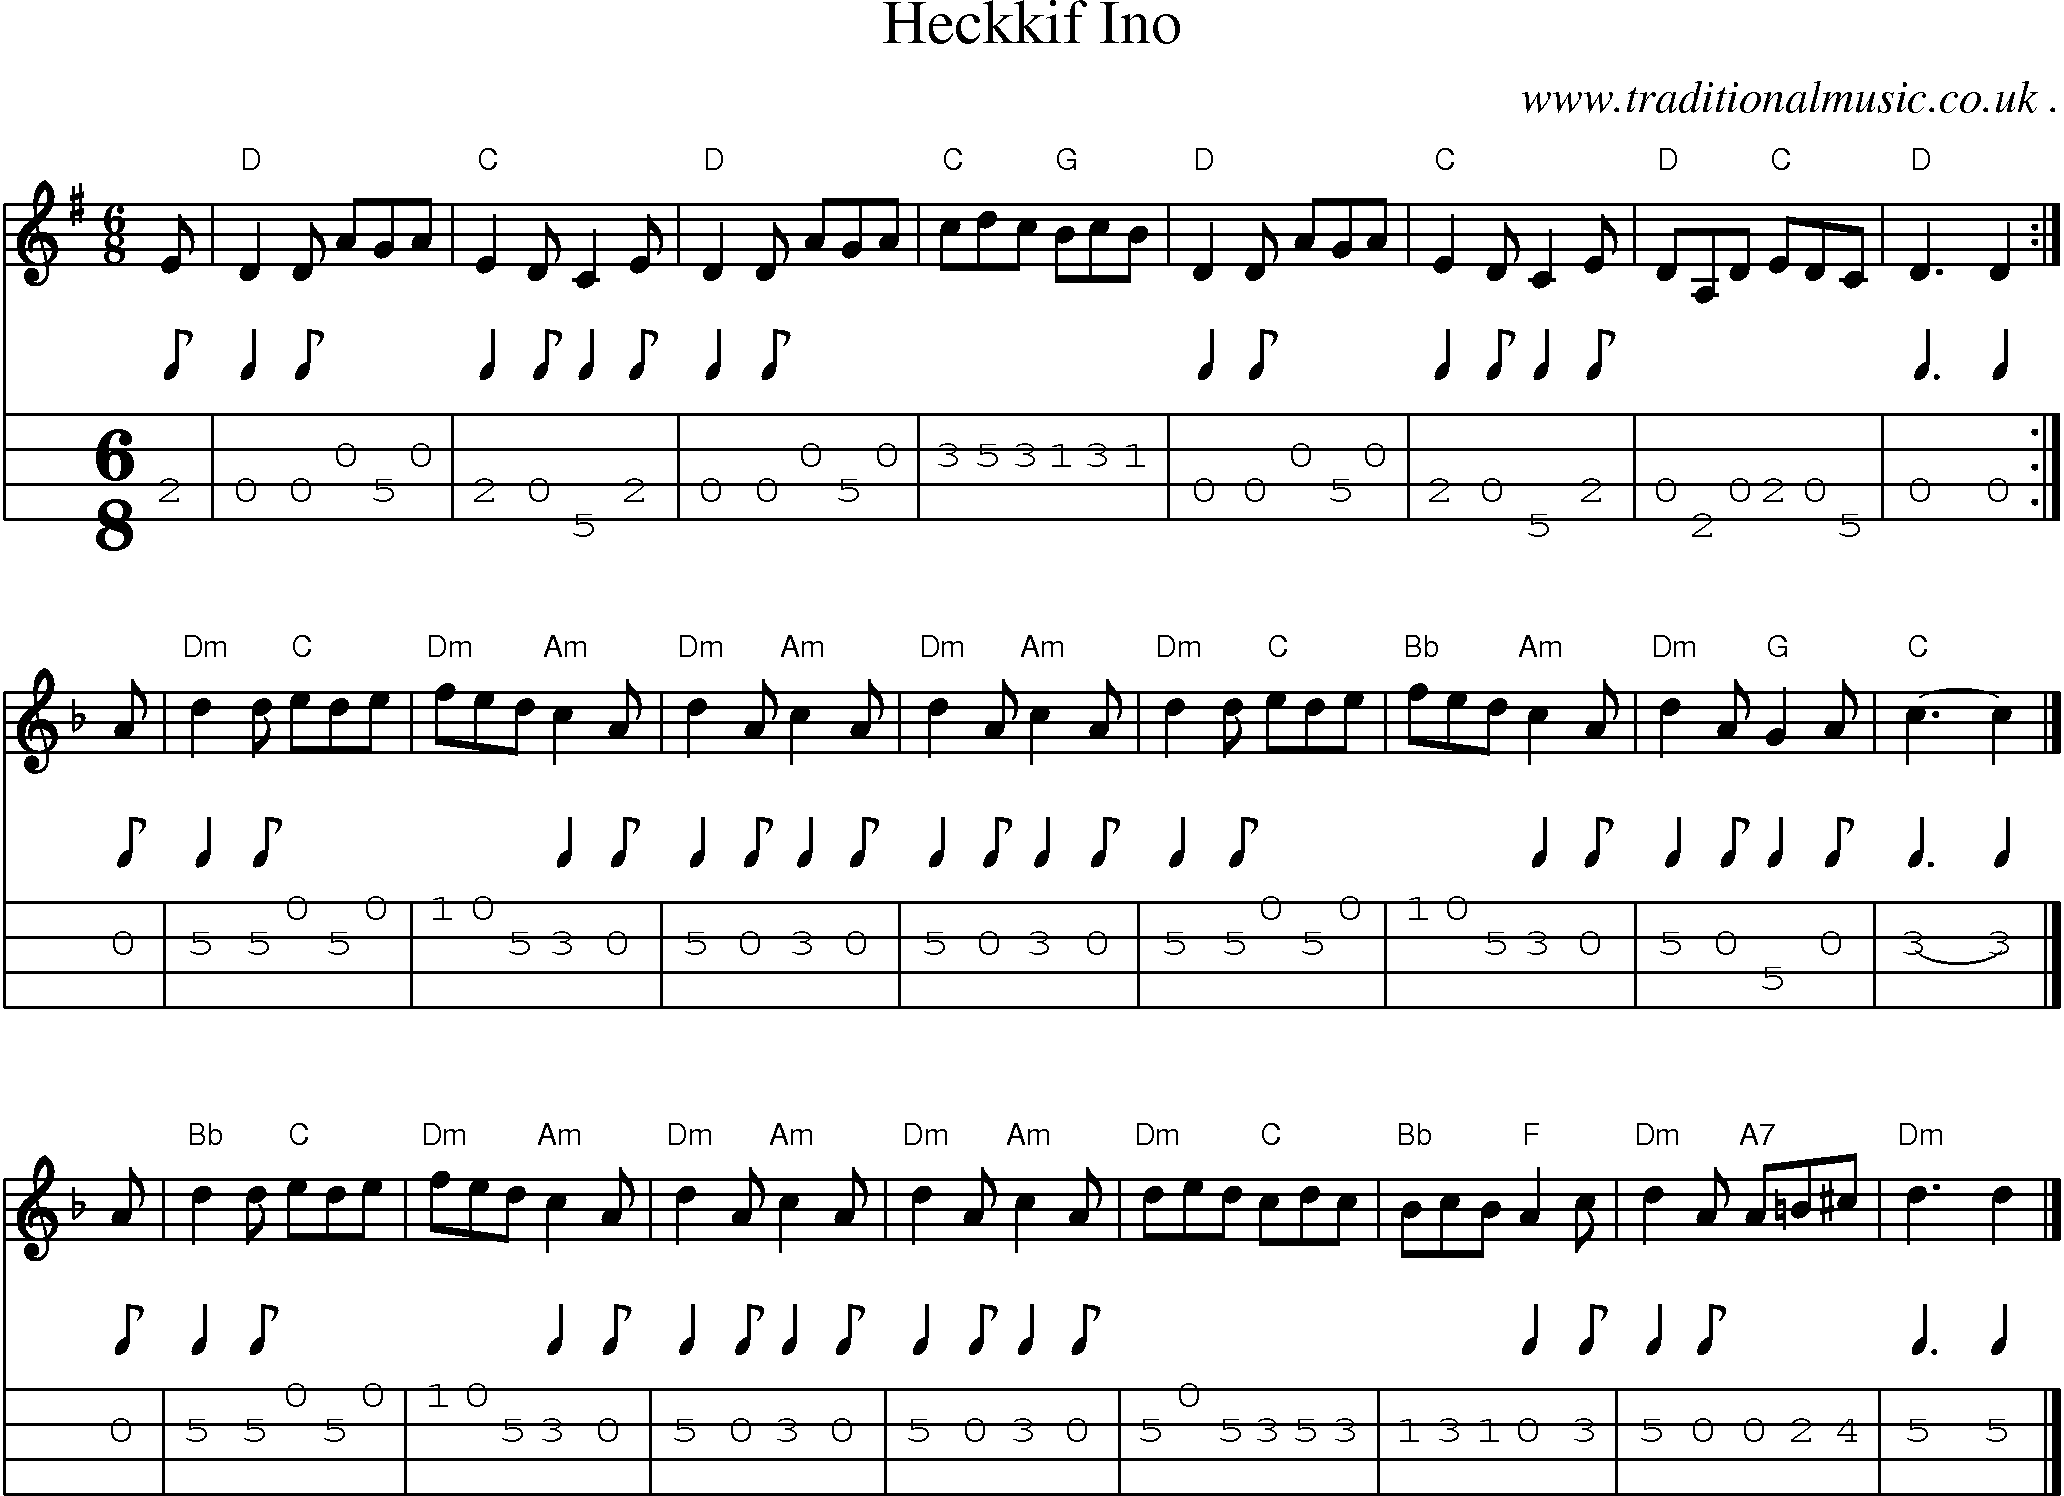 Sheet-music  score, Chords and Mandolin Tabs for Heckkif Ino